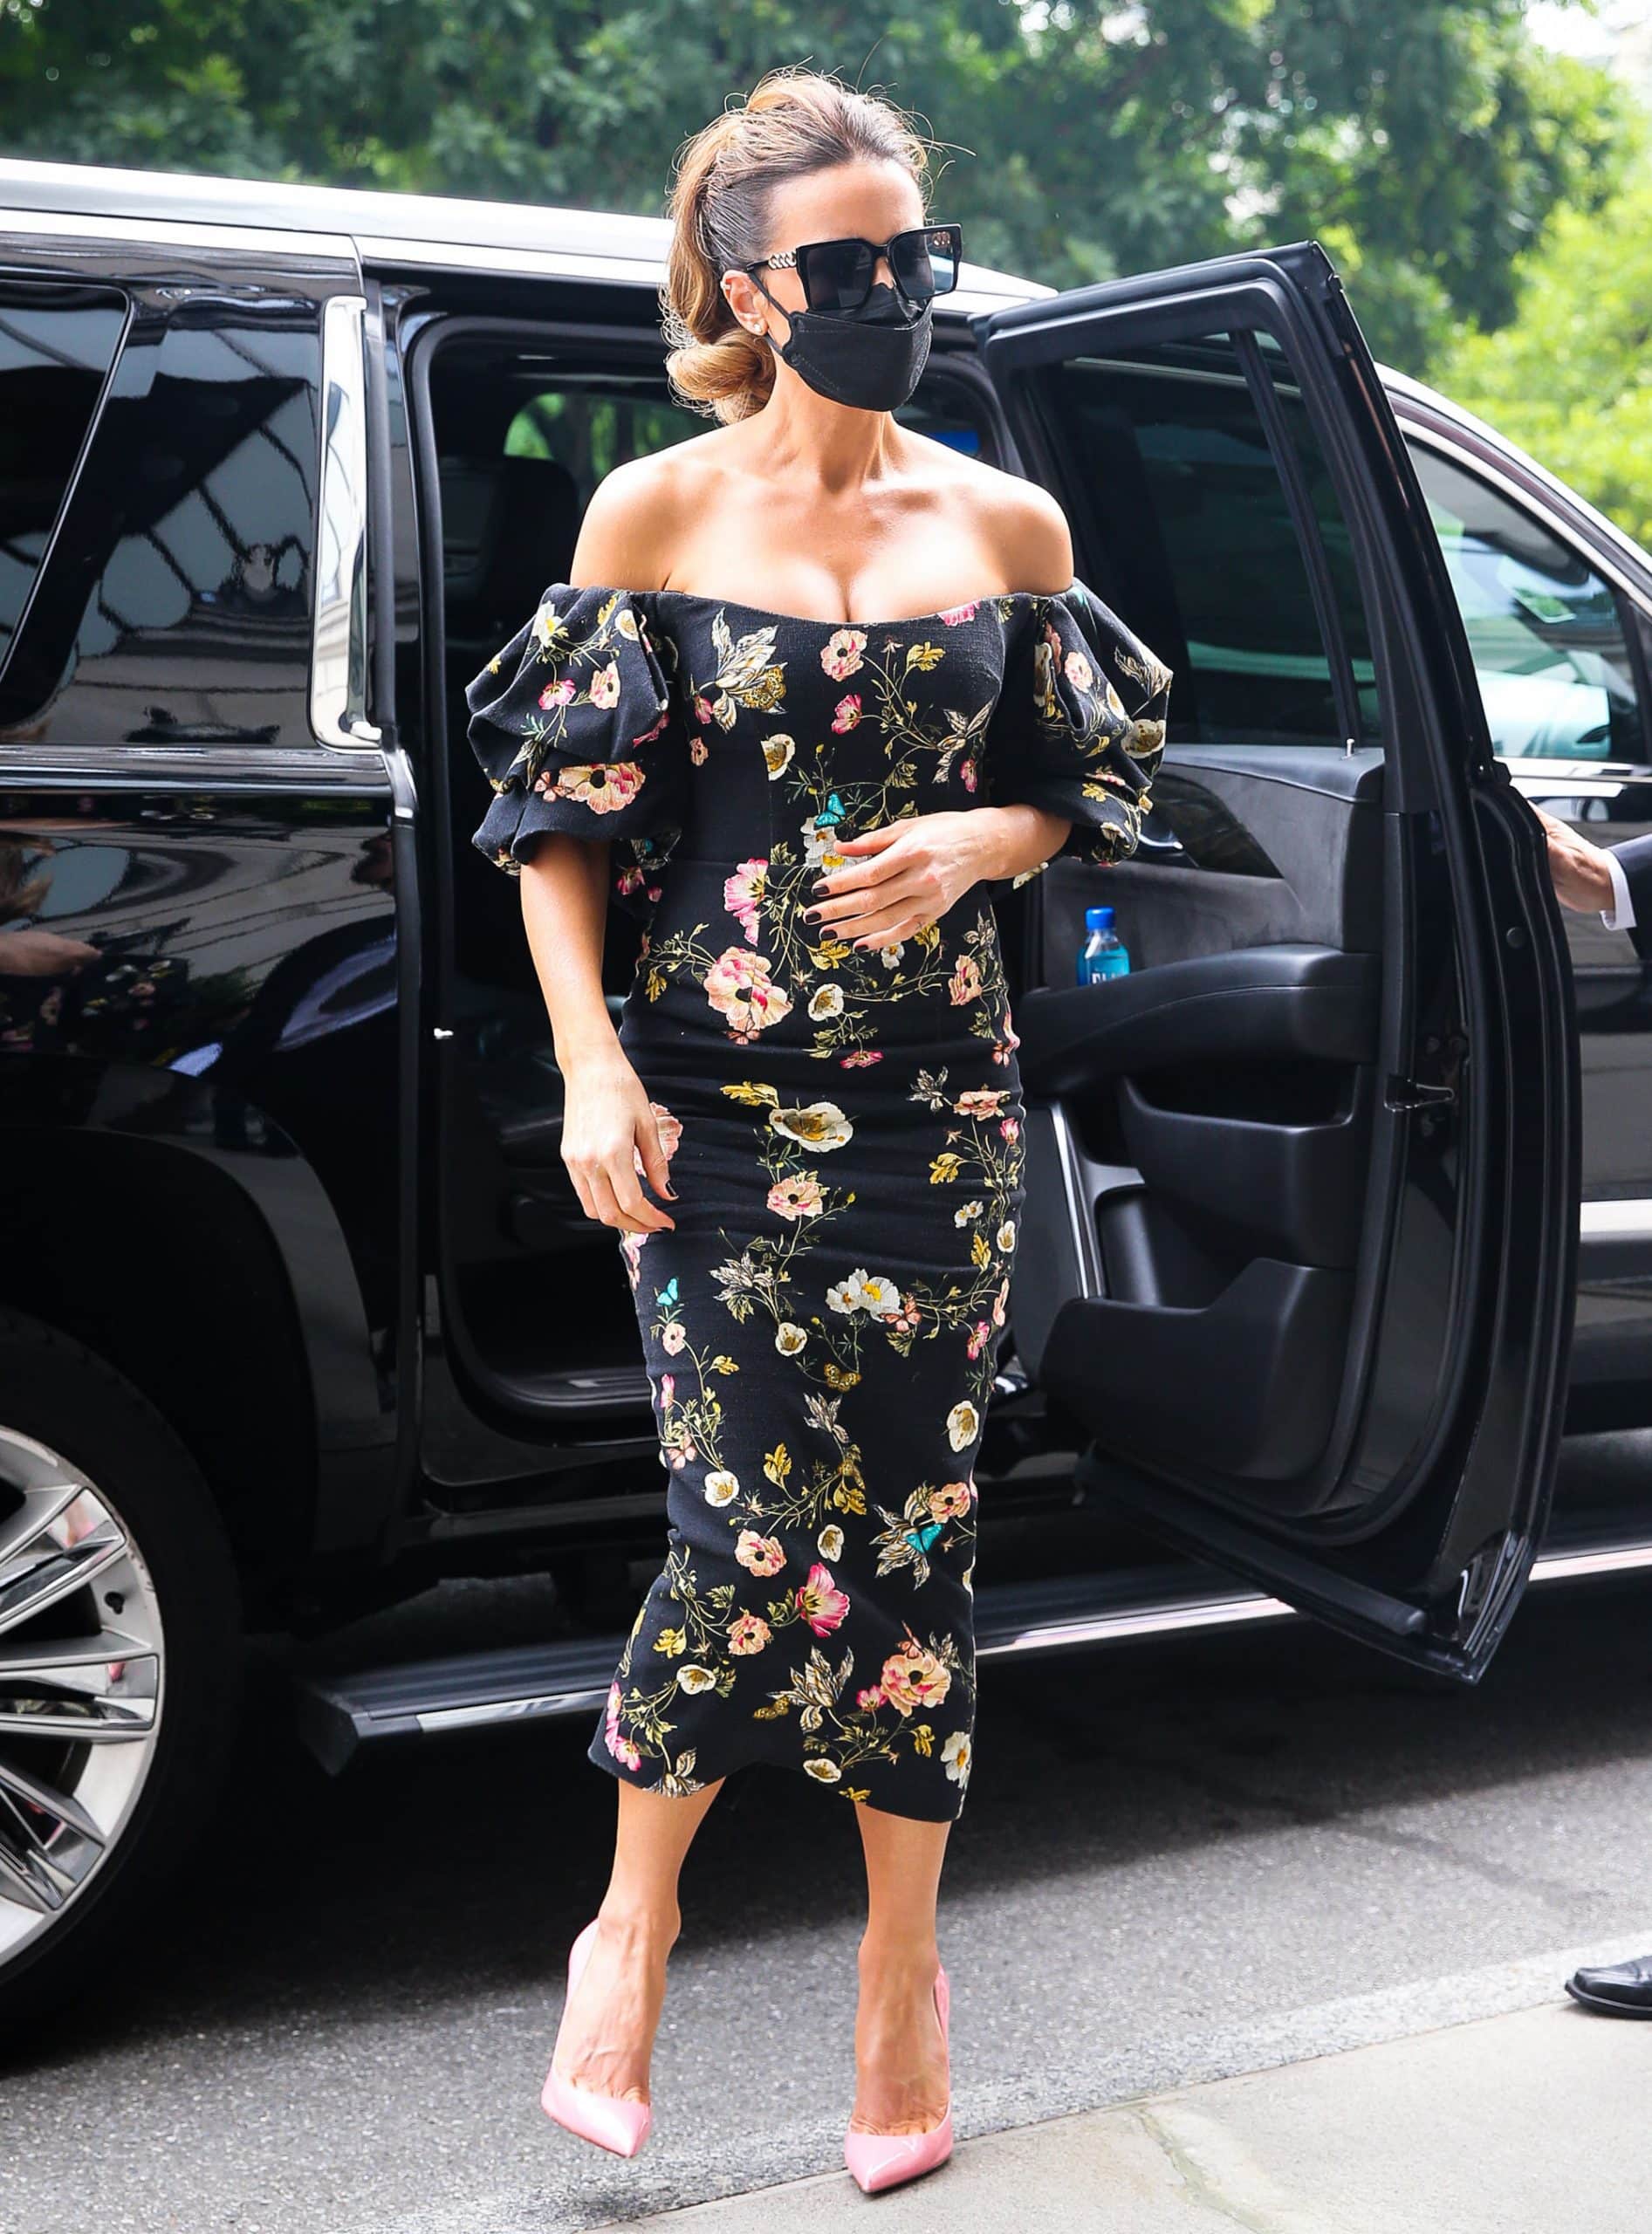 Kate Beckinsale heads back to her NYC hotel after promoting Jolt movie at Live With Kelly and Ryan Show on July 21, 2021